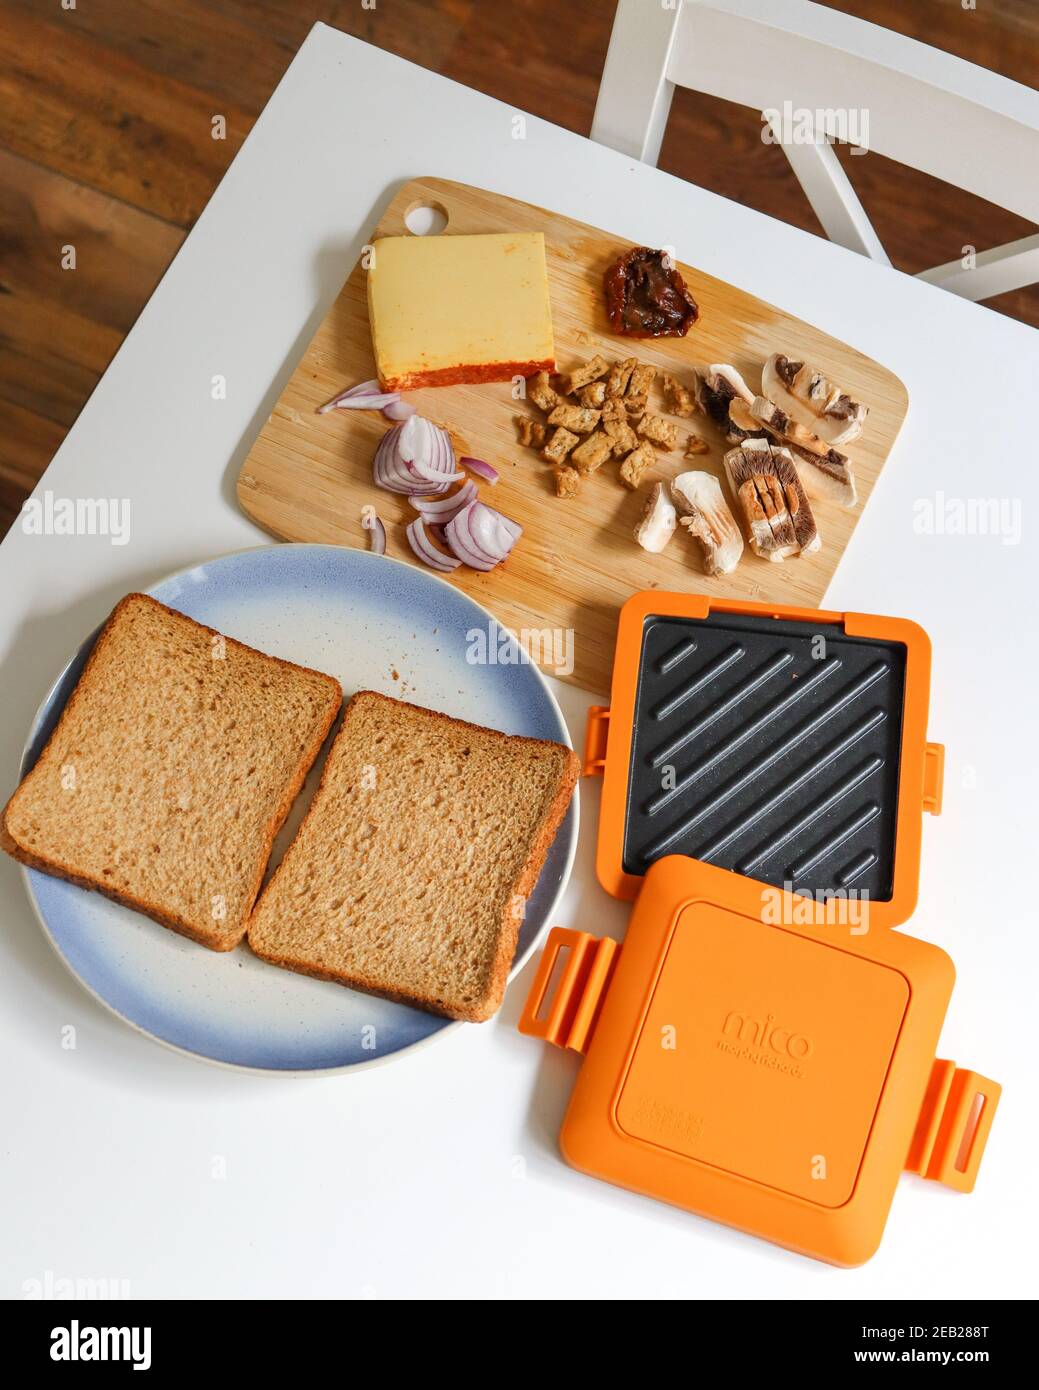 https://c8.alamy.com/comp/2EB288T/morphy-richards-mico-toastie-toasted-sandwiches-microwave-cookware-kitchen-food-preparation-cooking-snack-grilled-sandwich-ve-2EB288T.jpg